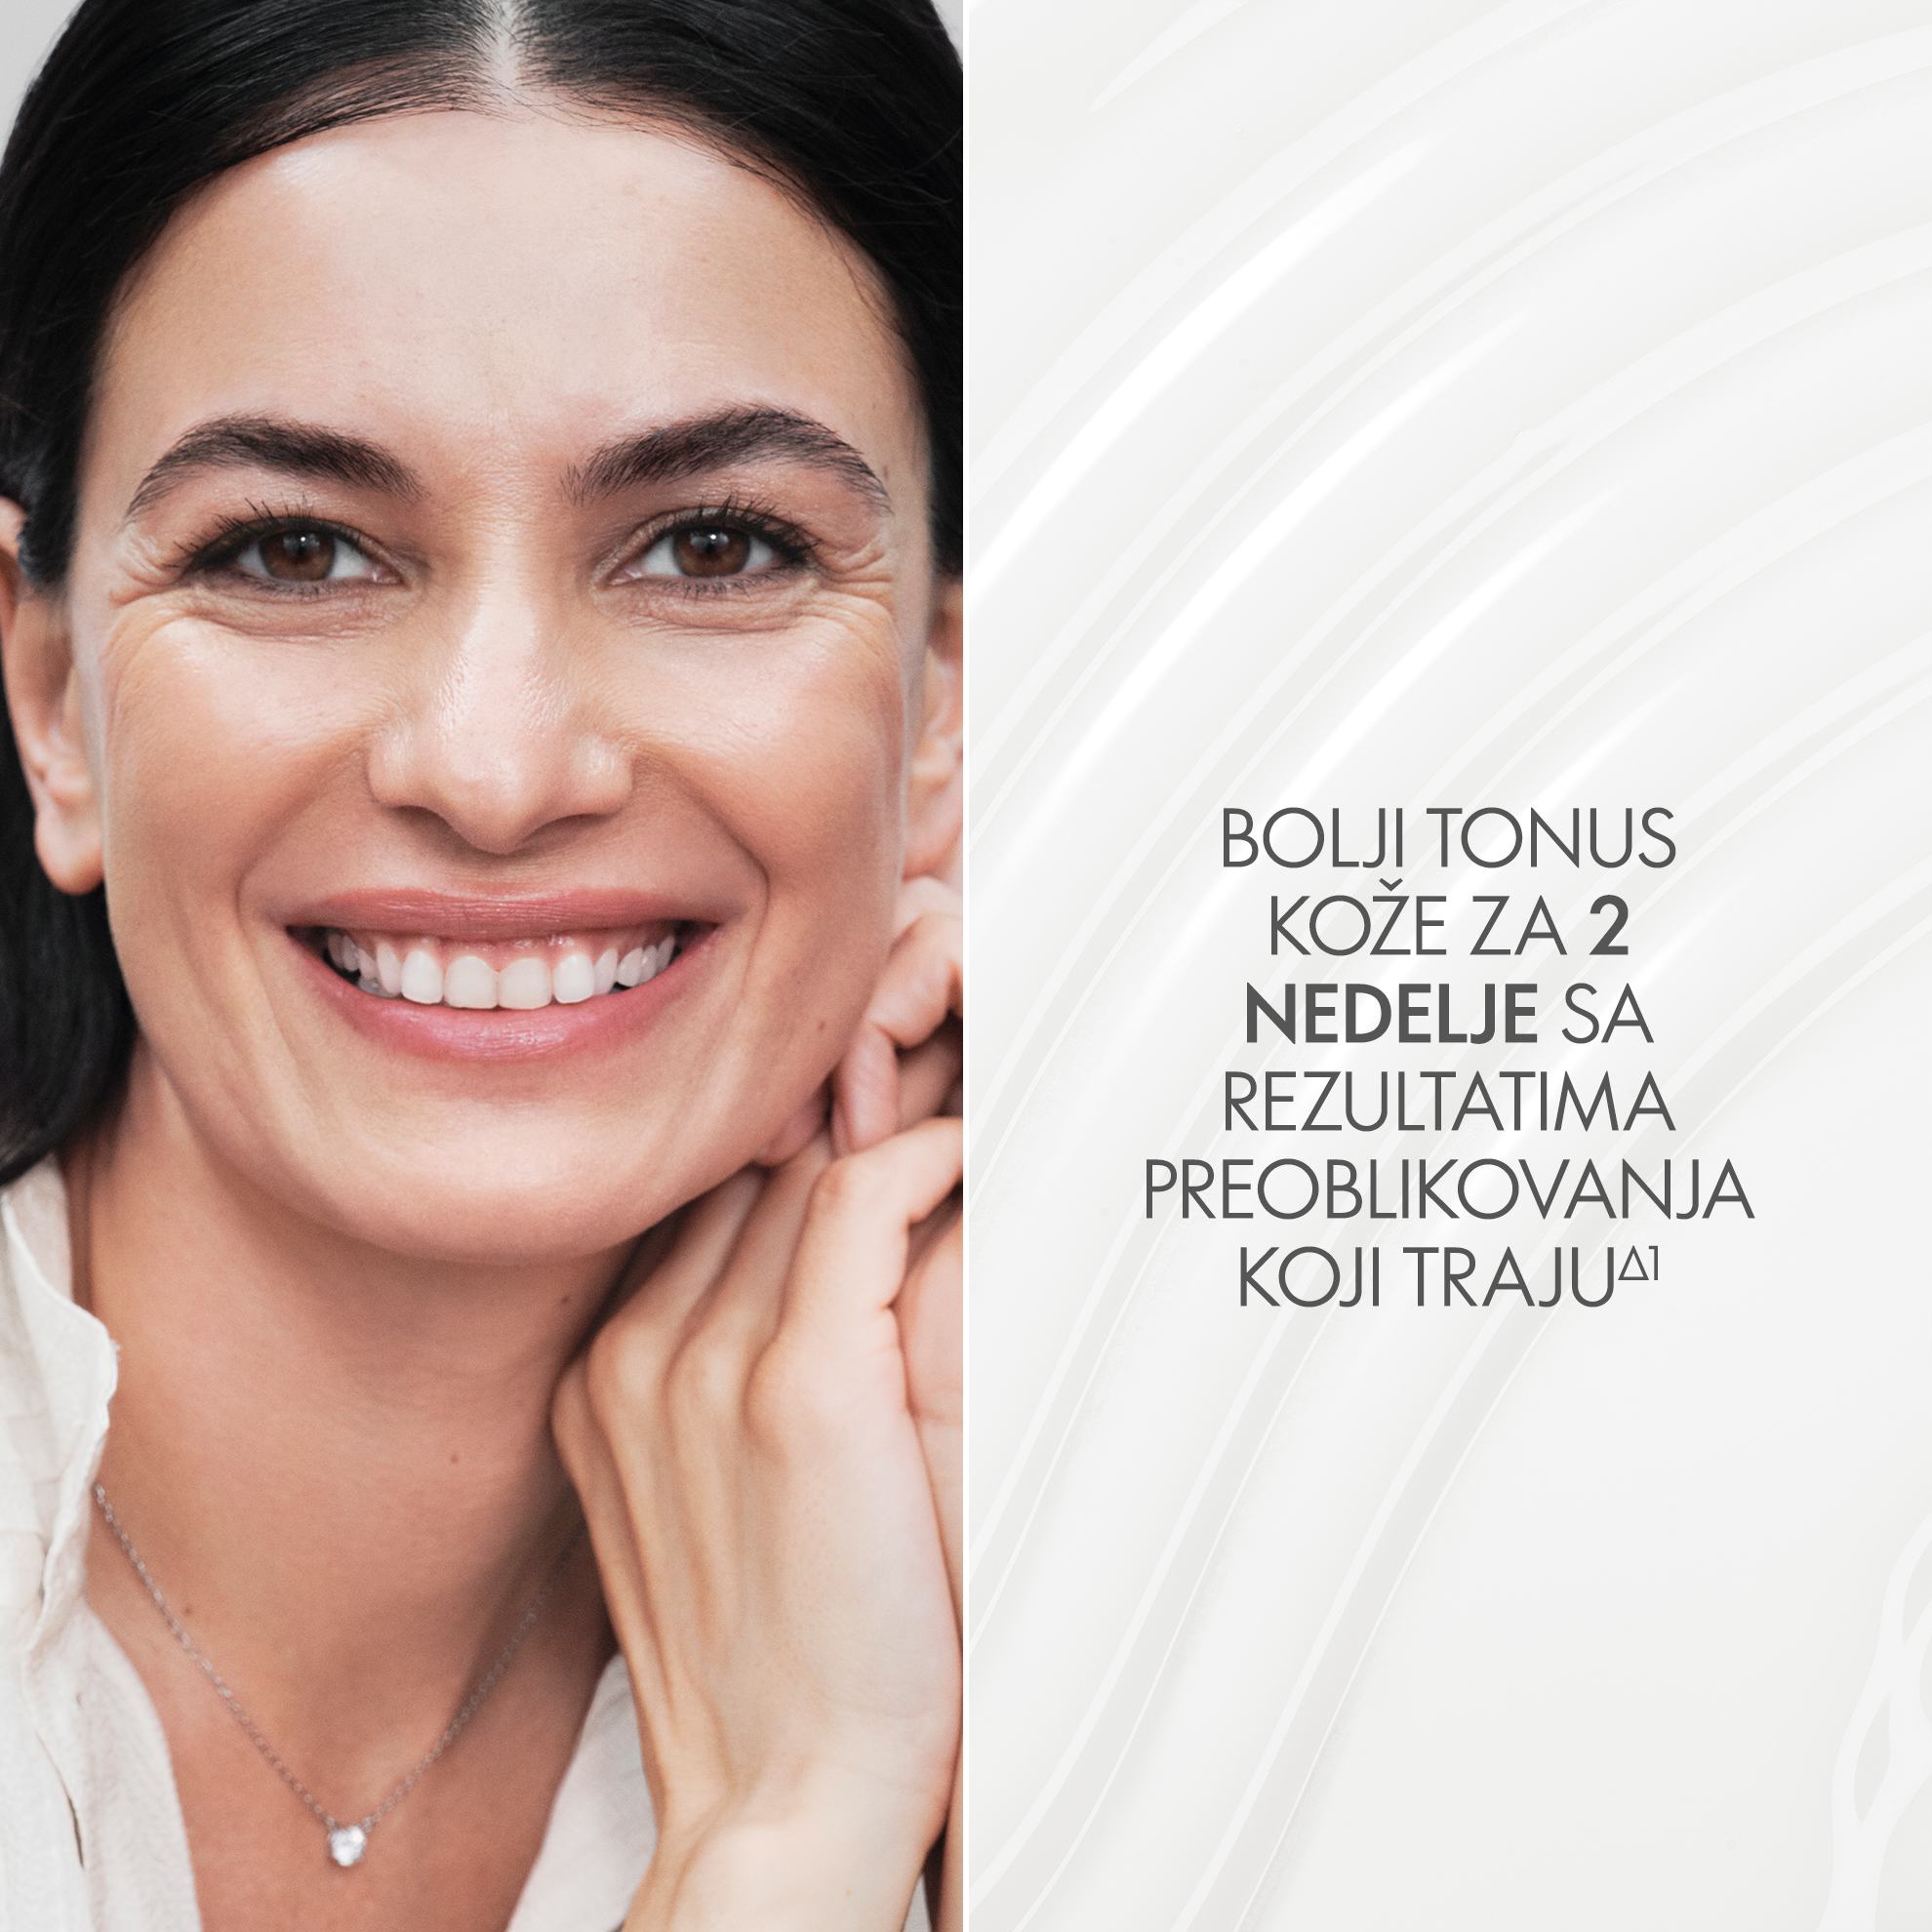 https://media-cdn.oriflame.com/productImage?externalMediaId=product-management-media%2fProducts%2f43691%2fRS%2f43691_2.png&id=17551064&version=2